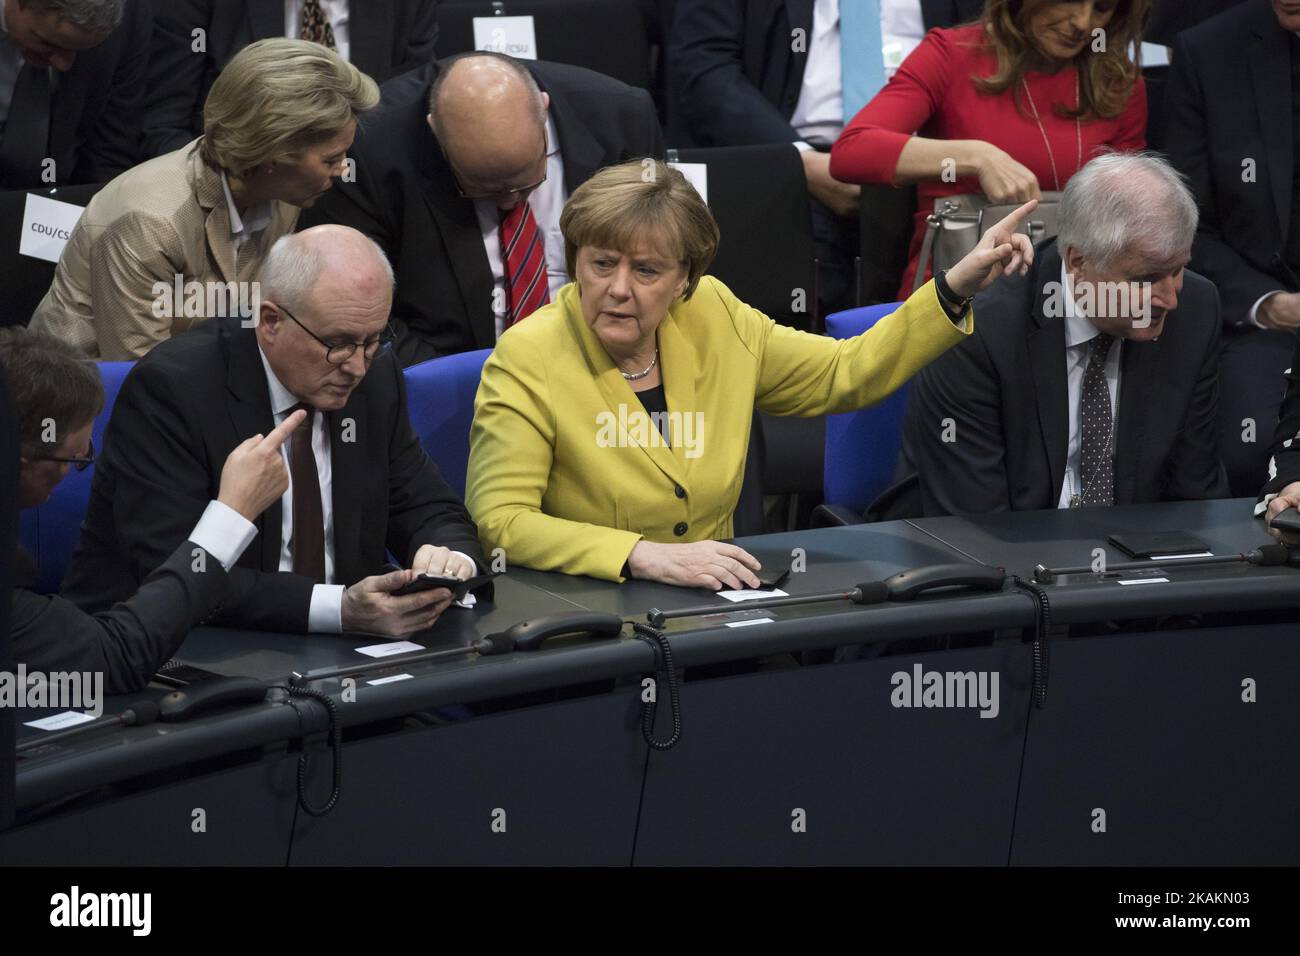 German Chancellor Angela Merkel (C), President of Bavaria Horst Seehofer (R) and chairman of the CDU/CSU Bundestag faction Volker Kauder (L) chat during the vote for the presidential election by the Bundesversammlung (Federal Assembly) at the Reichstag in Berlin, Germany on February 12, 2017. Presidential candidate Frank-Walter Steinmeier, 61, is certain to be voted as new President being the official candidate of the government parties CDU/CSU and SPD and supported from FDP and Green party, against poverty researcher Christoph Butterwegge, nominated by the left party Die Linke and Albrecht Gl Stock Photo